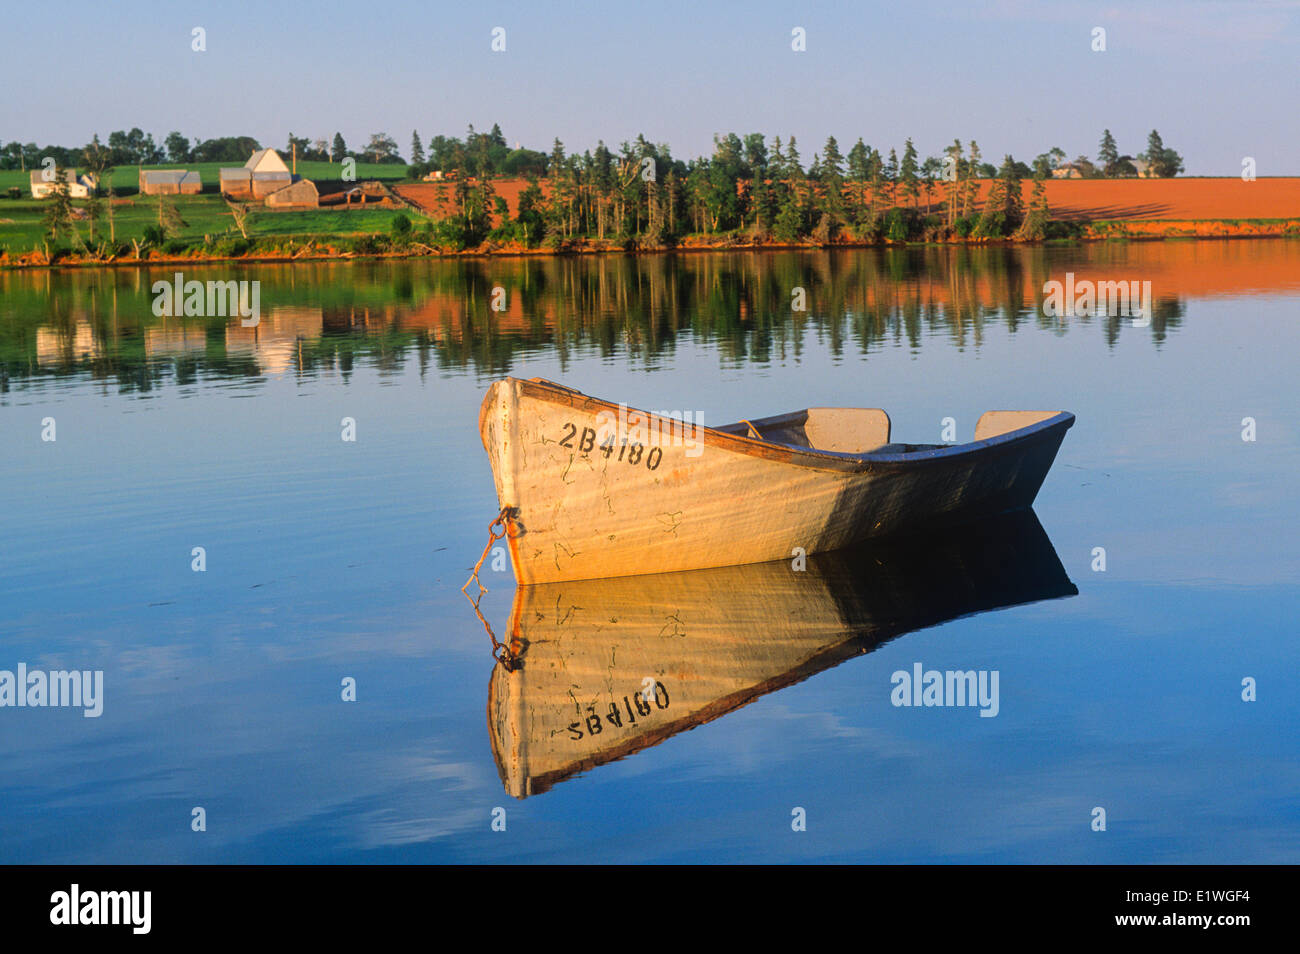 Wooden boat, West River, St. Catherines, Prince Edward Island, Canada Stock Photo